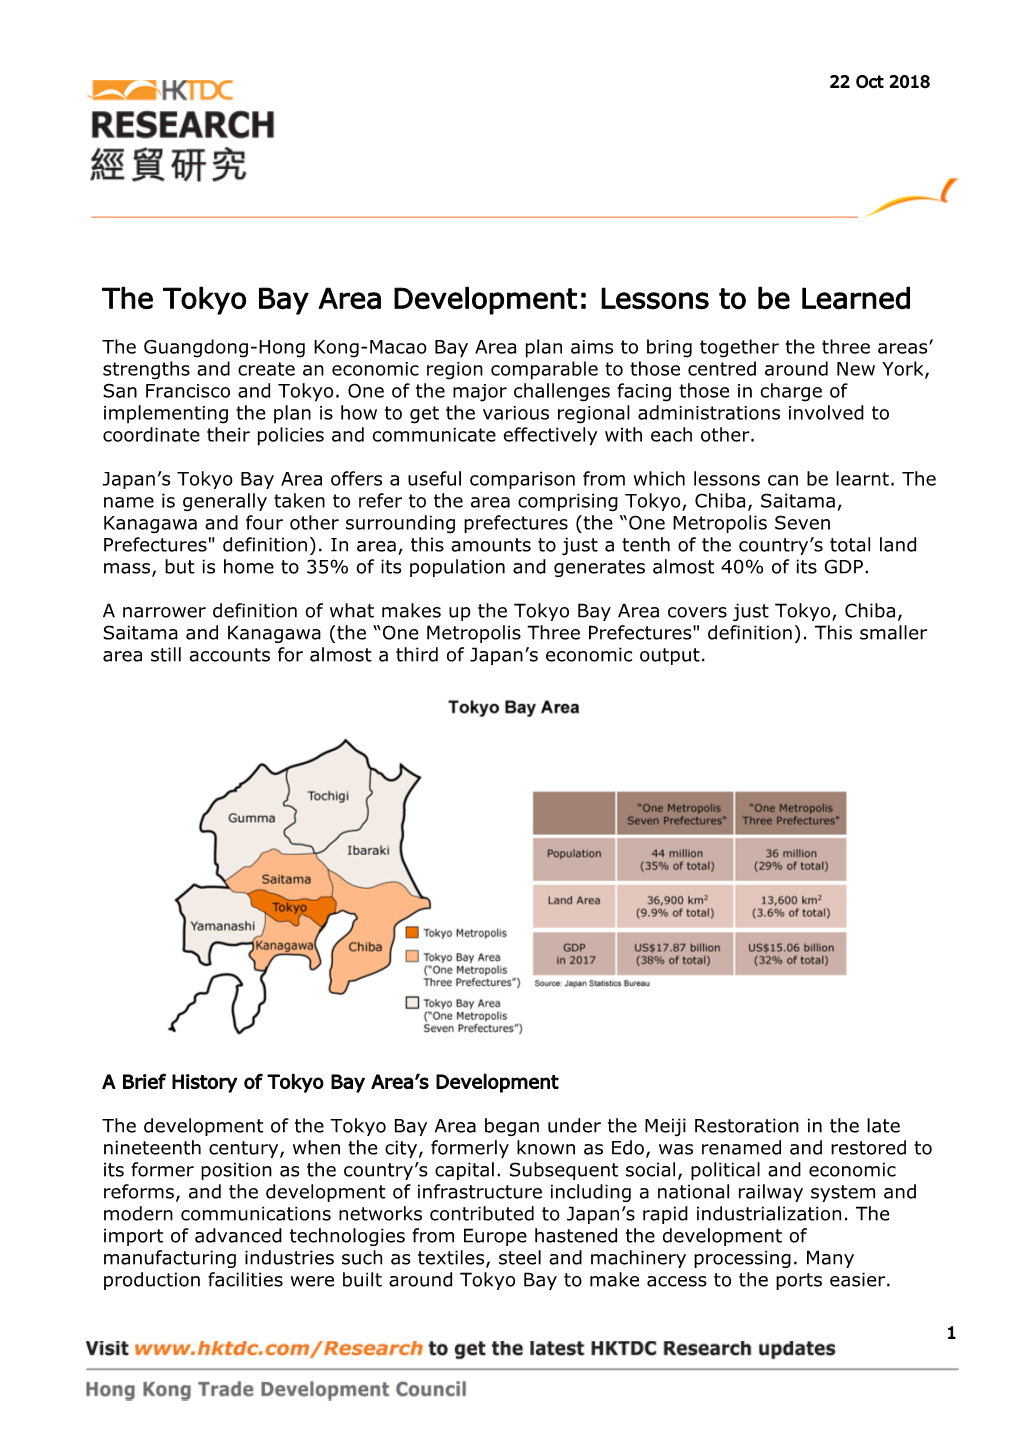 The Tokyo Bay Area Development: Lessons to Be Learned